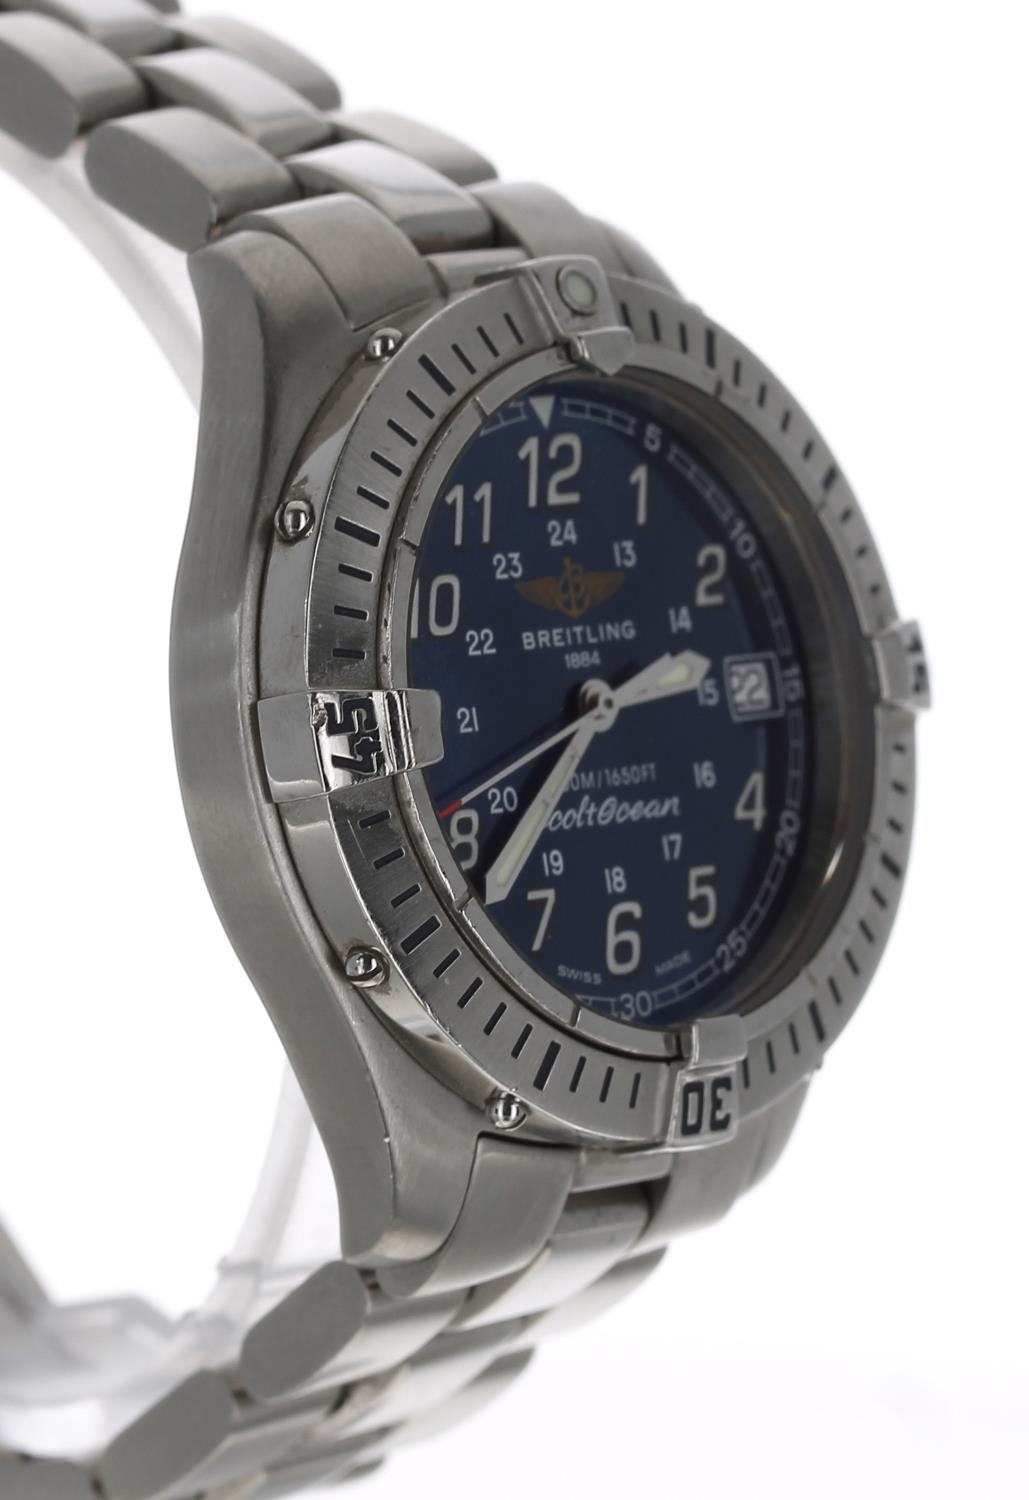 Breitling Colt Ocean stainless steel gentleman's wristwatch, reference no. A64350, serial no. - Image 3 of 5